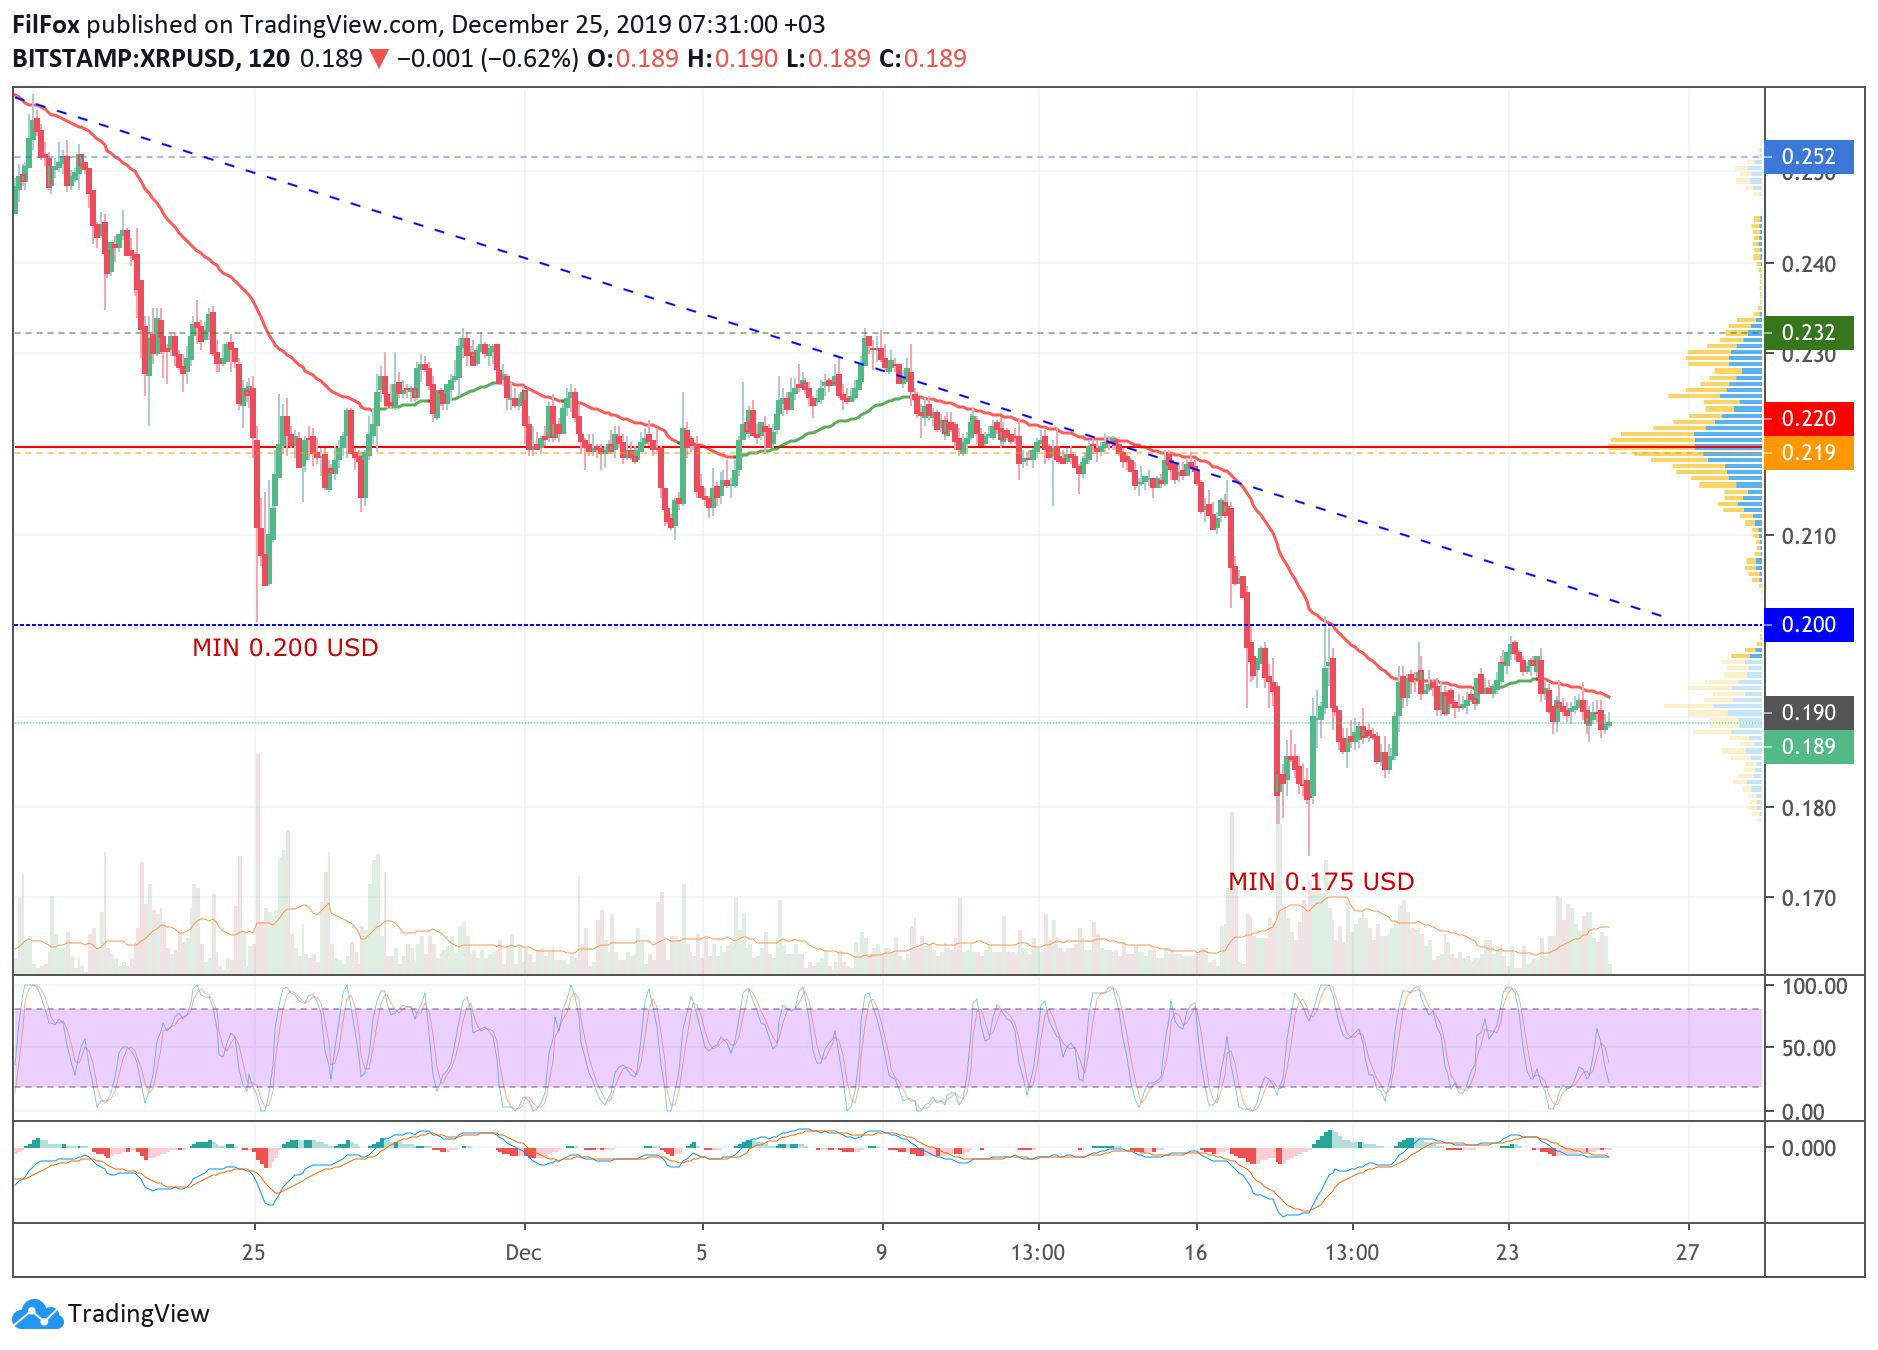 Analysis of cryptocurrency pairs BTC / USD, ETH / USD and XRP / USD as of December 25, 2019